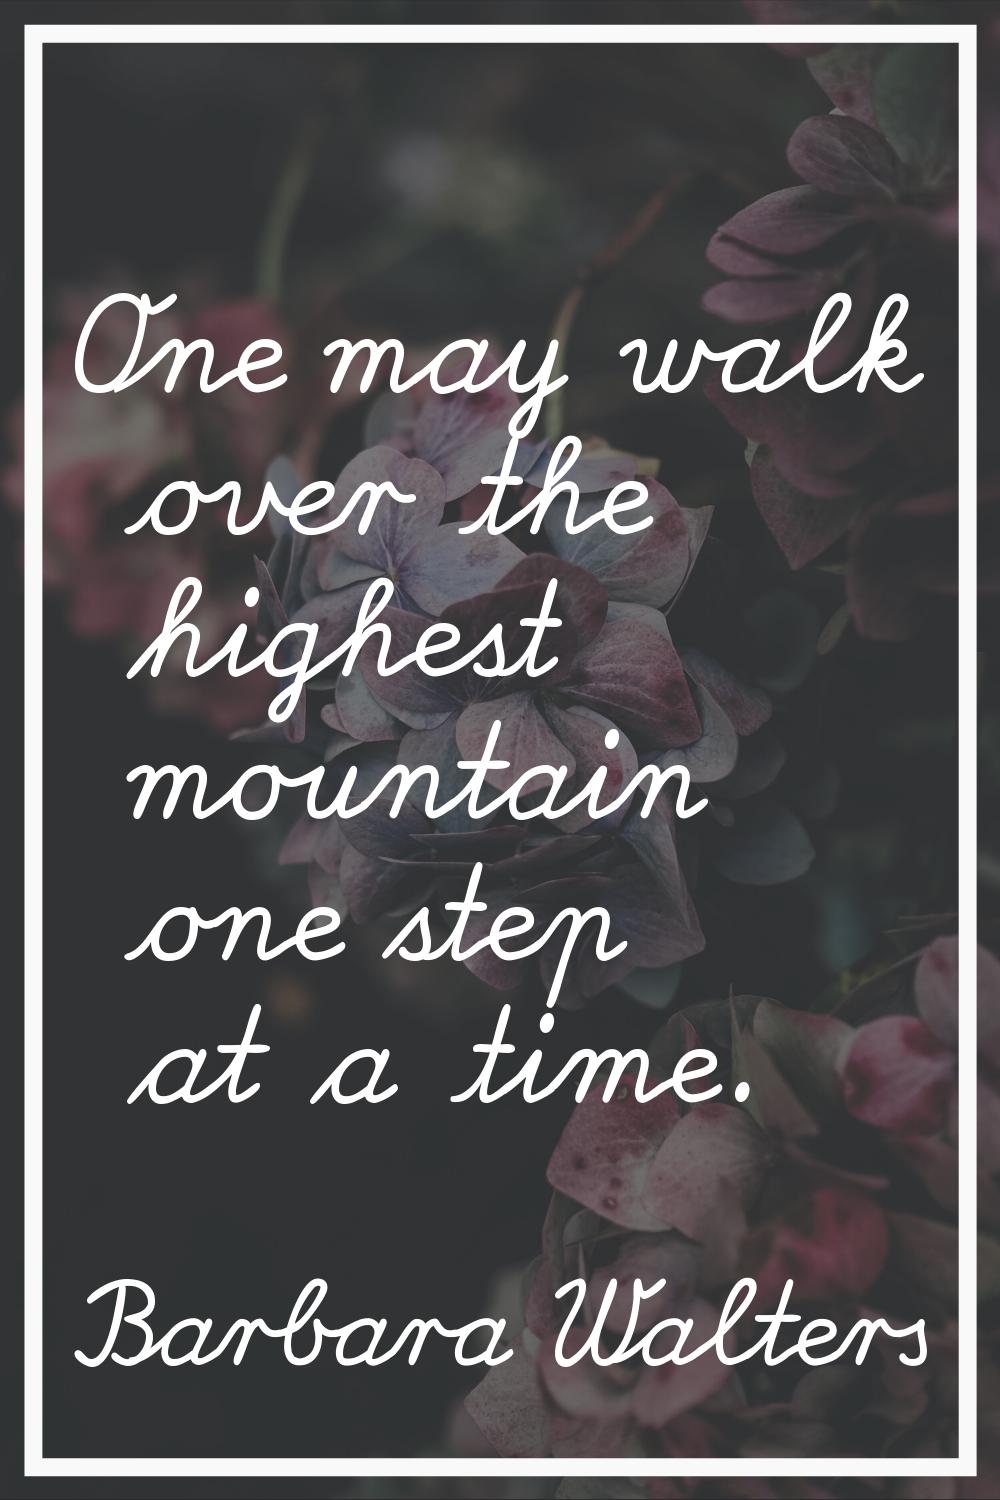 One may walk over the highest mountain one step at a time.